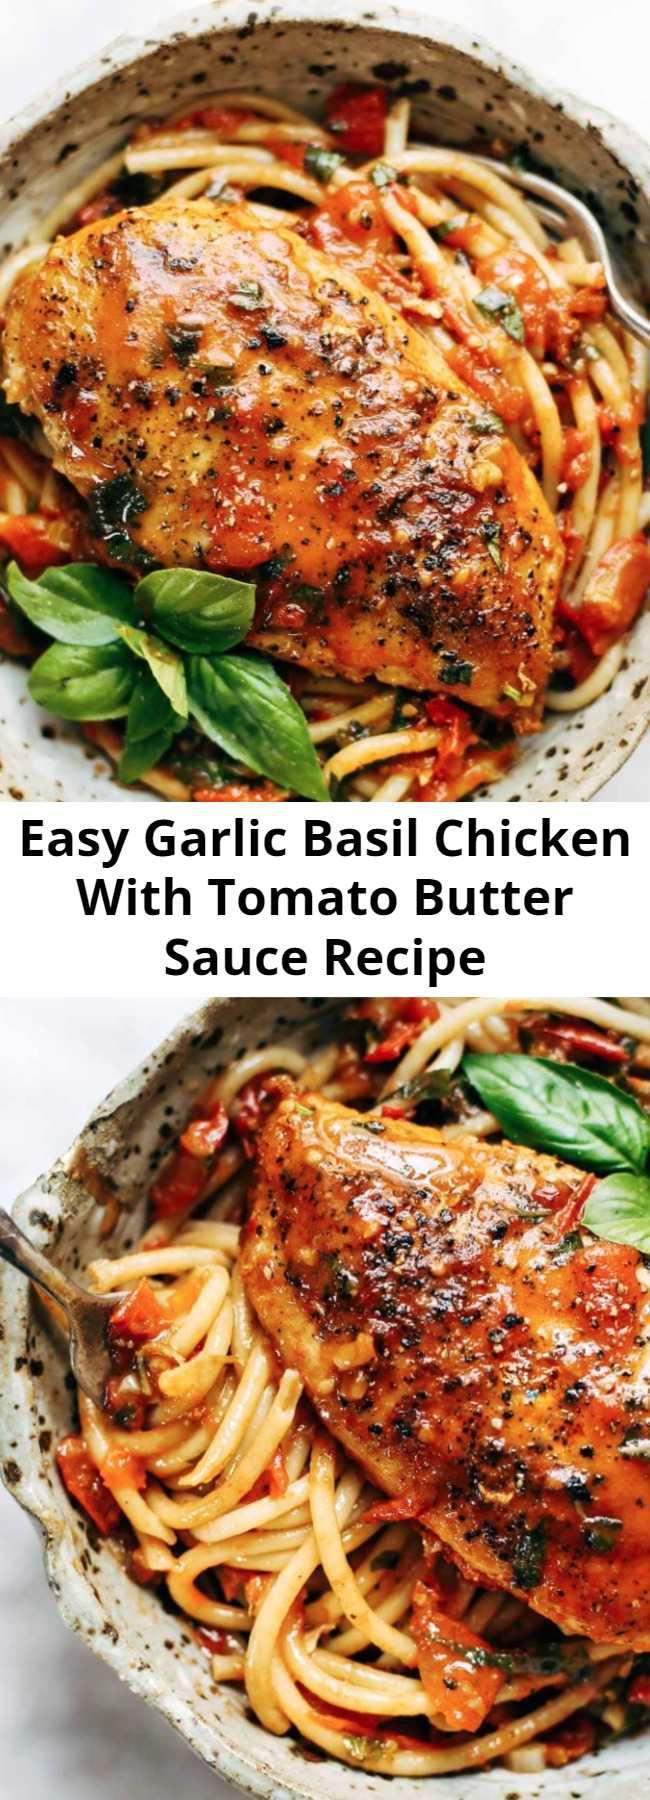 Easy Garlic Basil Chicken With Tomato Butter Sauce Recipe - You won’t believe that this easy real food recipe only requires 7 ingredients like basil, garlic, olive oil, tomatoes, and butter.